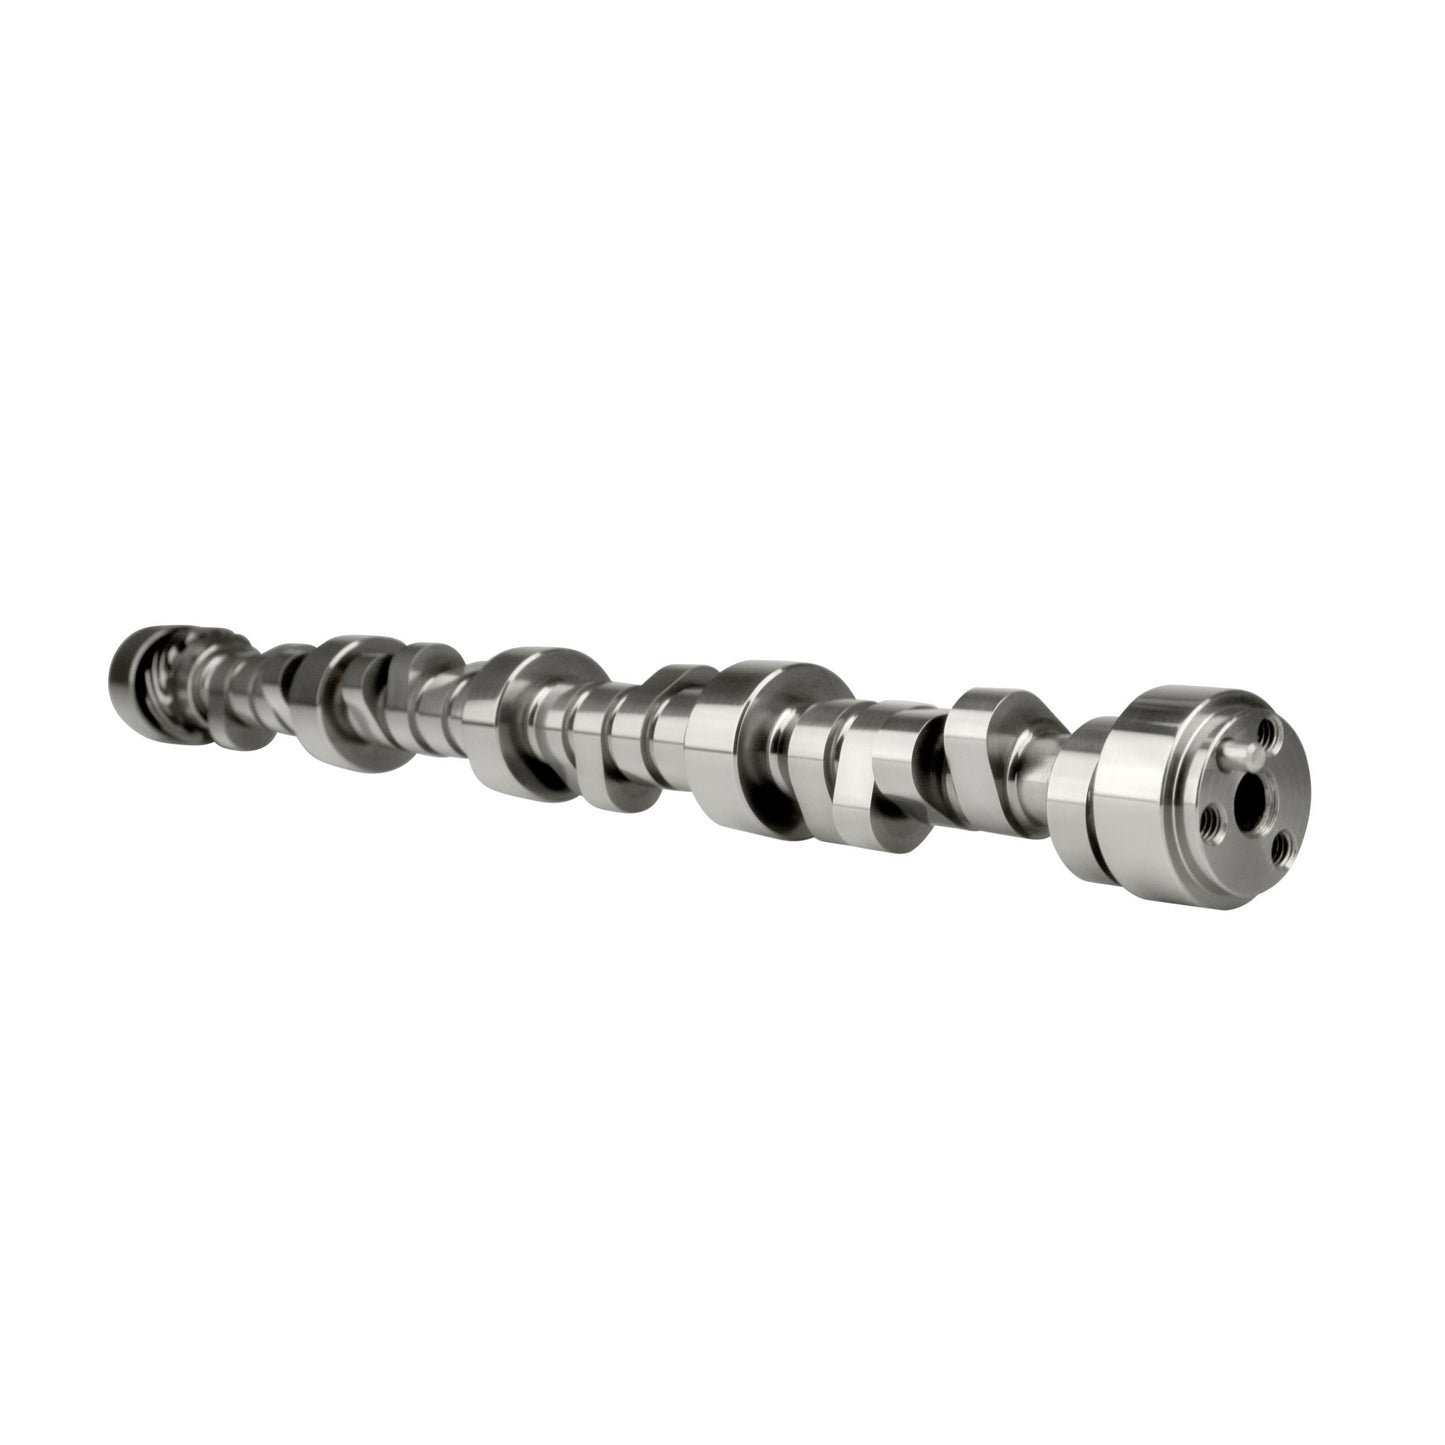 COMP Cams Hustler 603/604 Crate Engine Hydraulic Roller Stage 1 Camshaft COMP-08-696-11